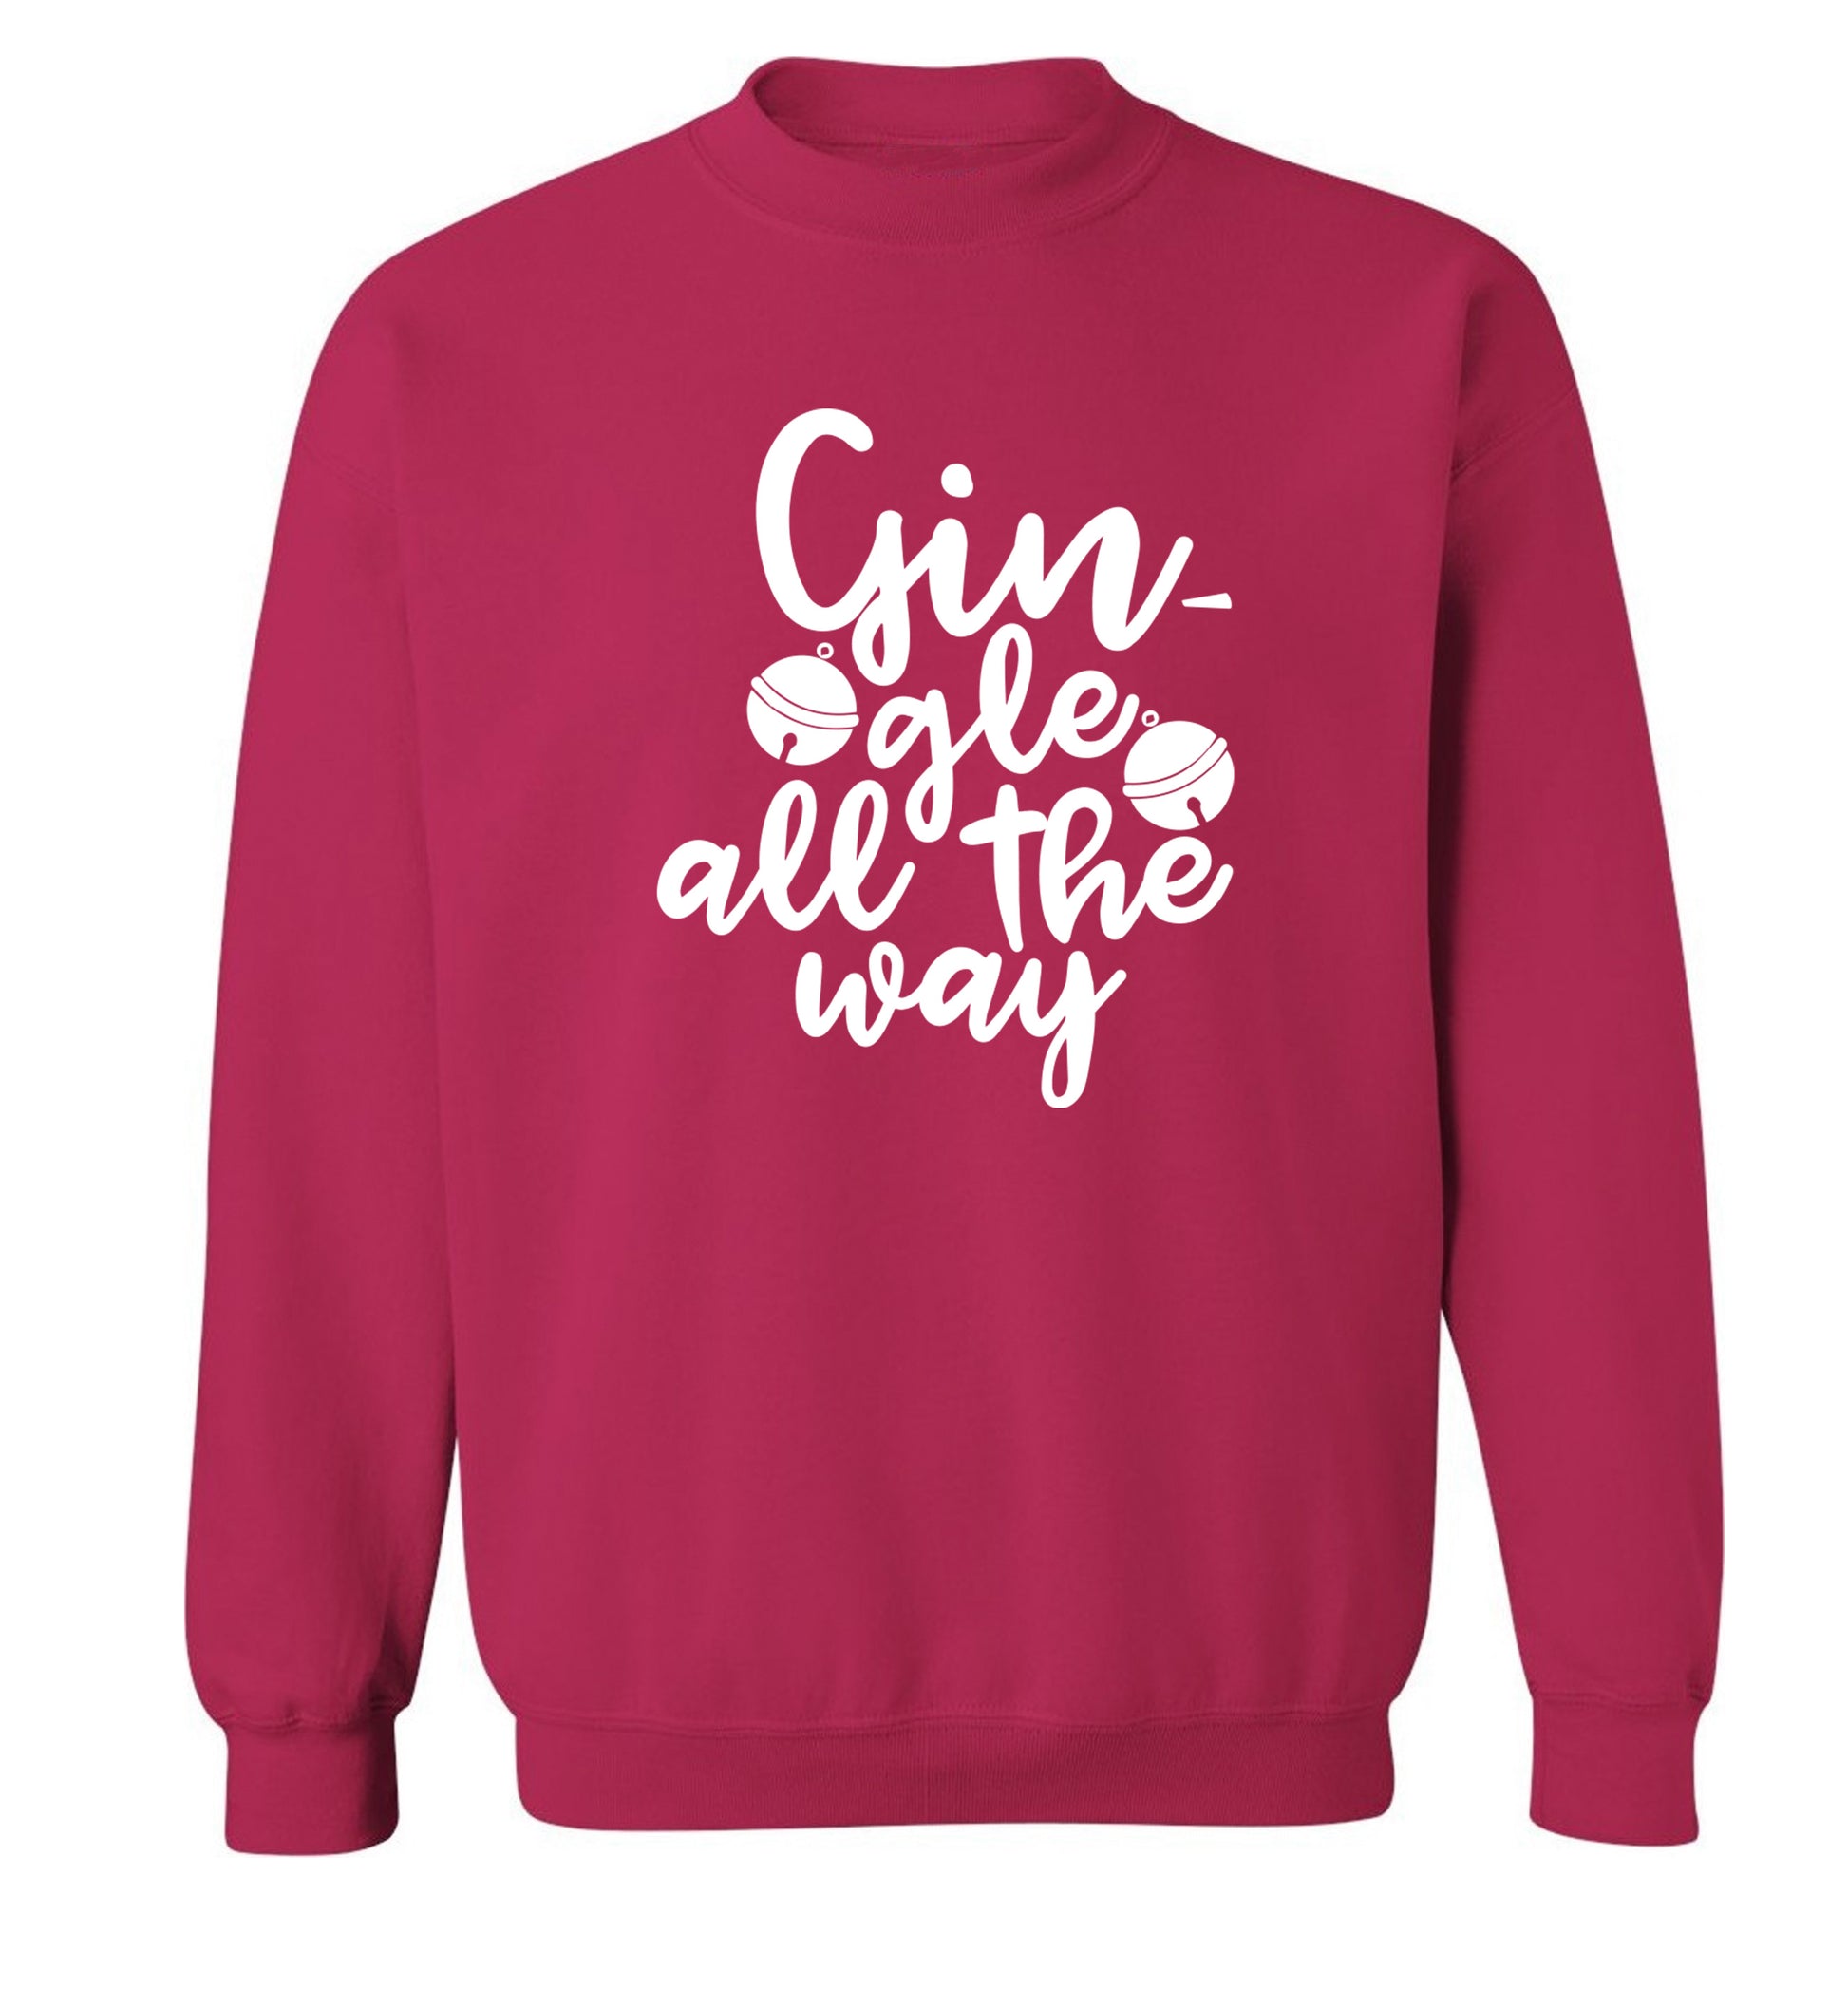 Gin-gle all the way Adult's unisex pink Sweater 2XL